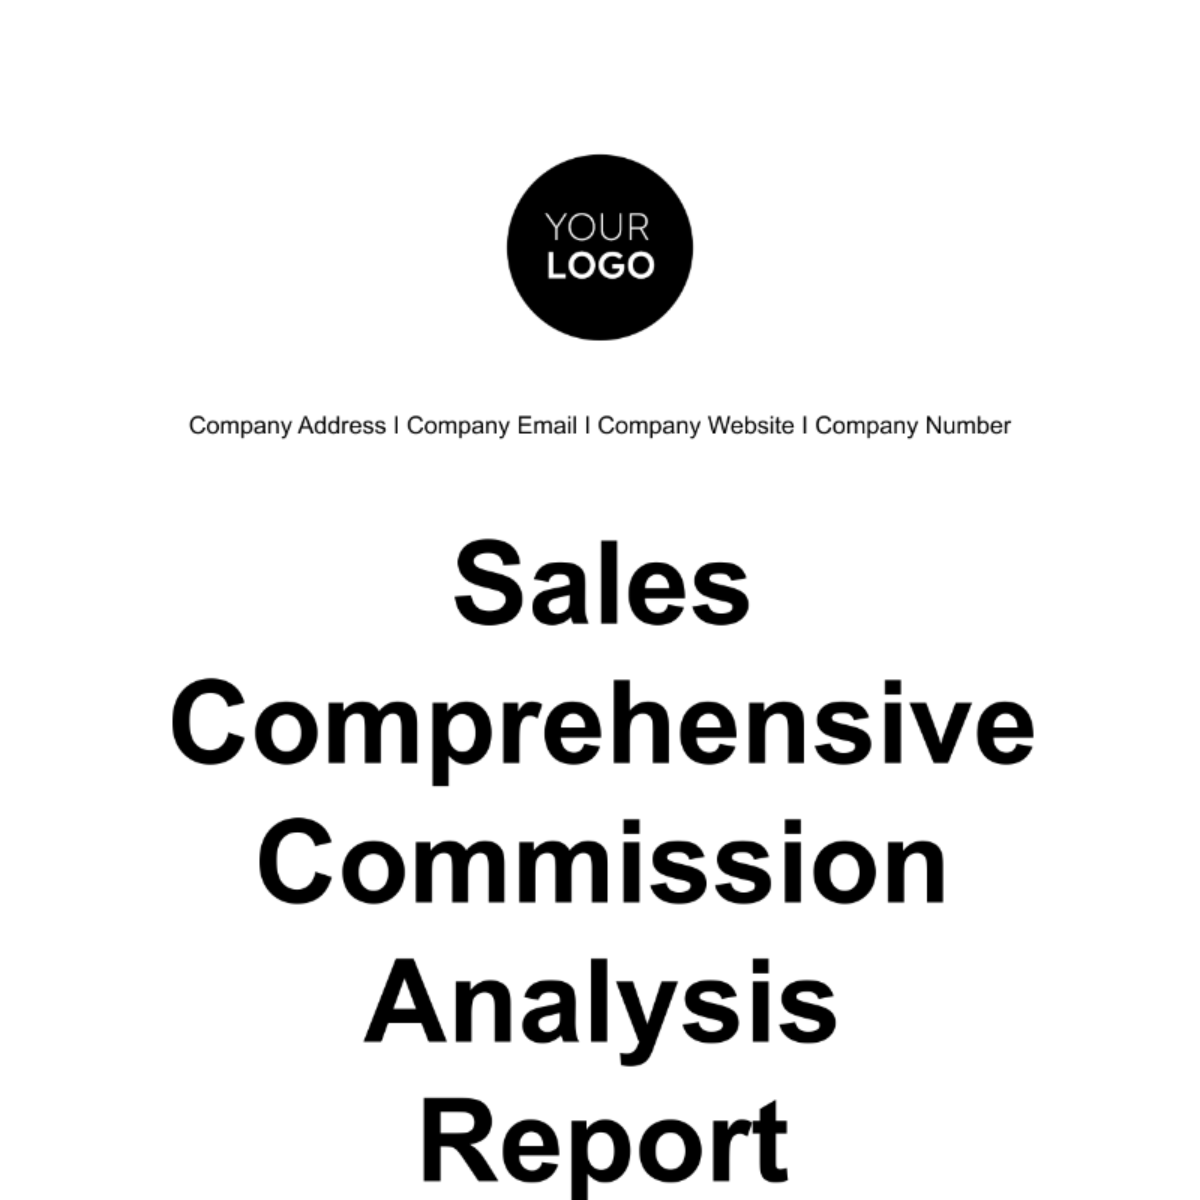 Sales Comprehensive Commission Analysis Report Template